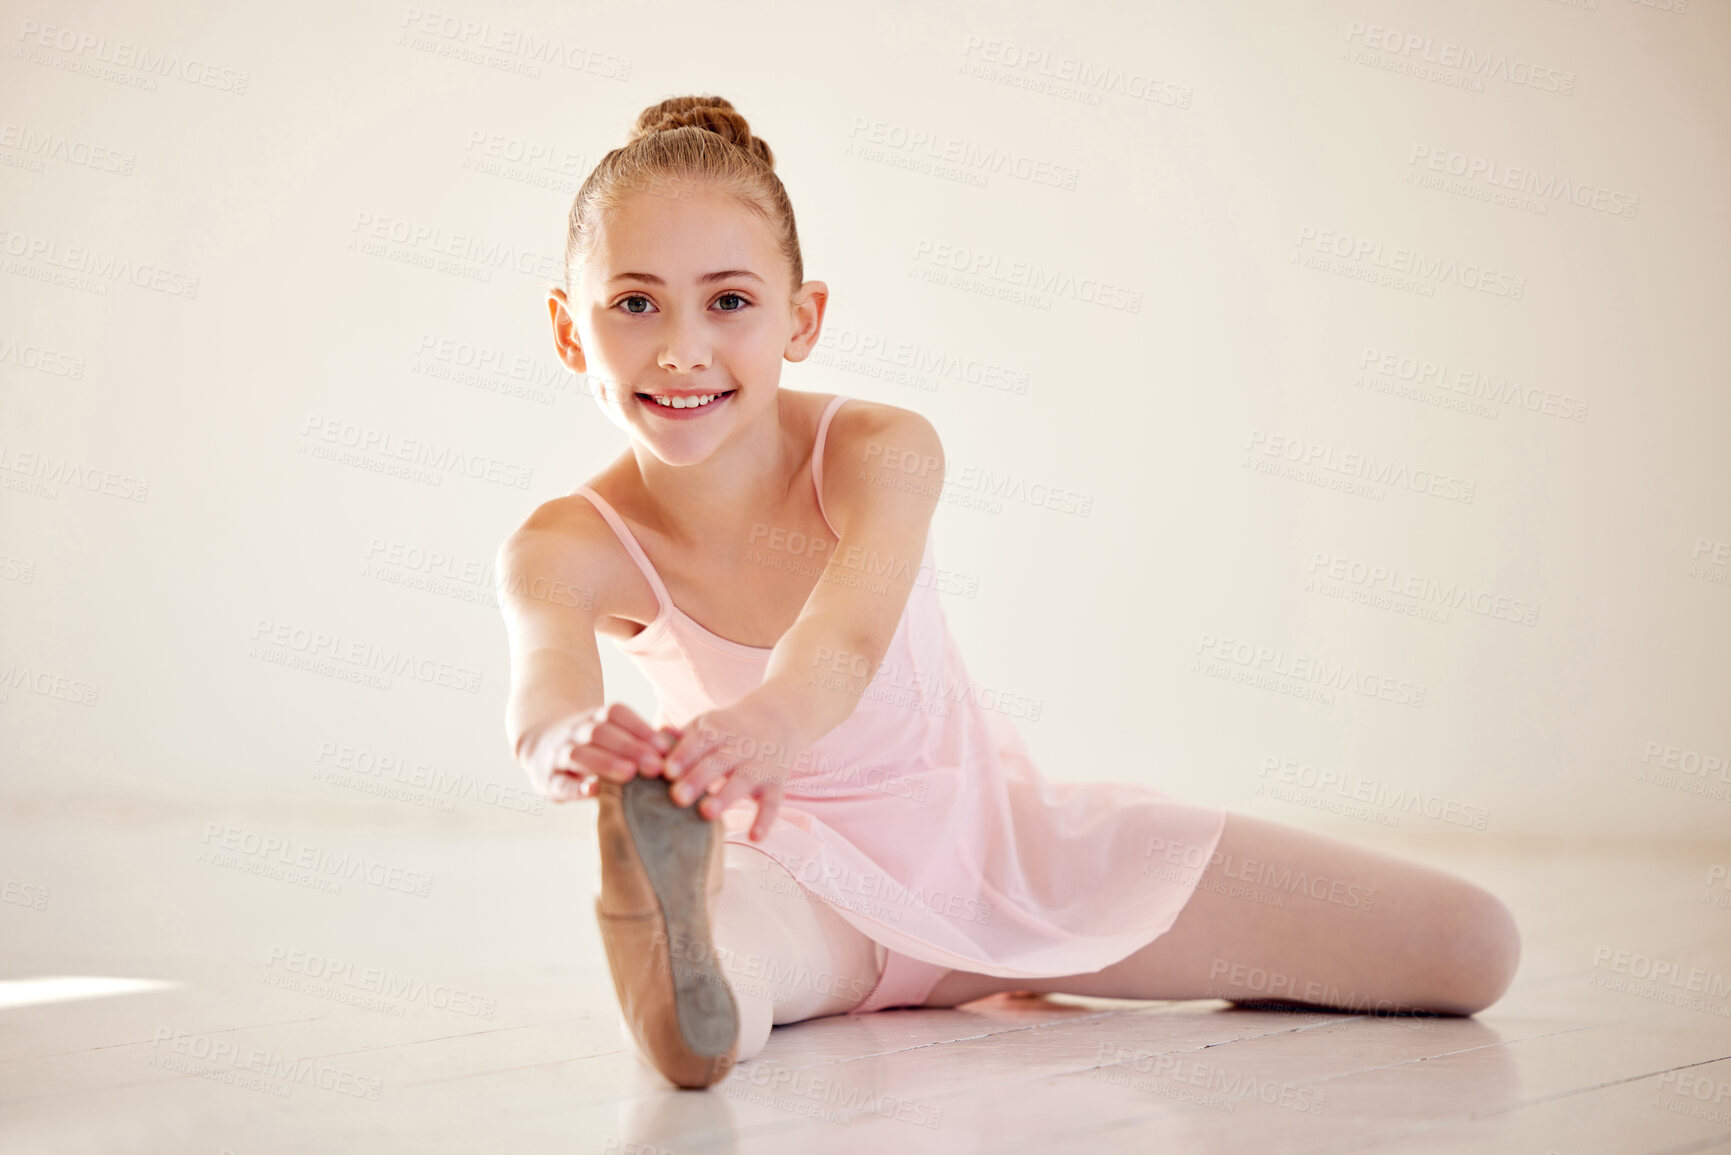 Buy stock photo Shot of a young ballerina stretching on the floor in a studio